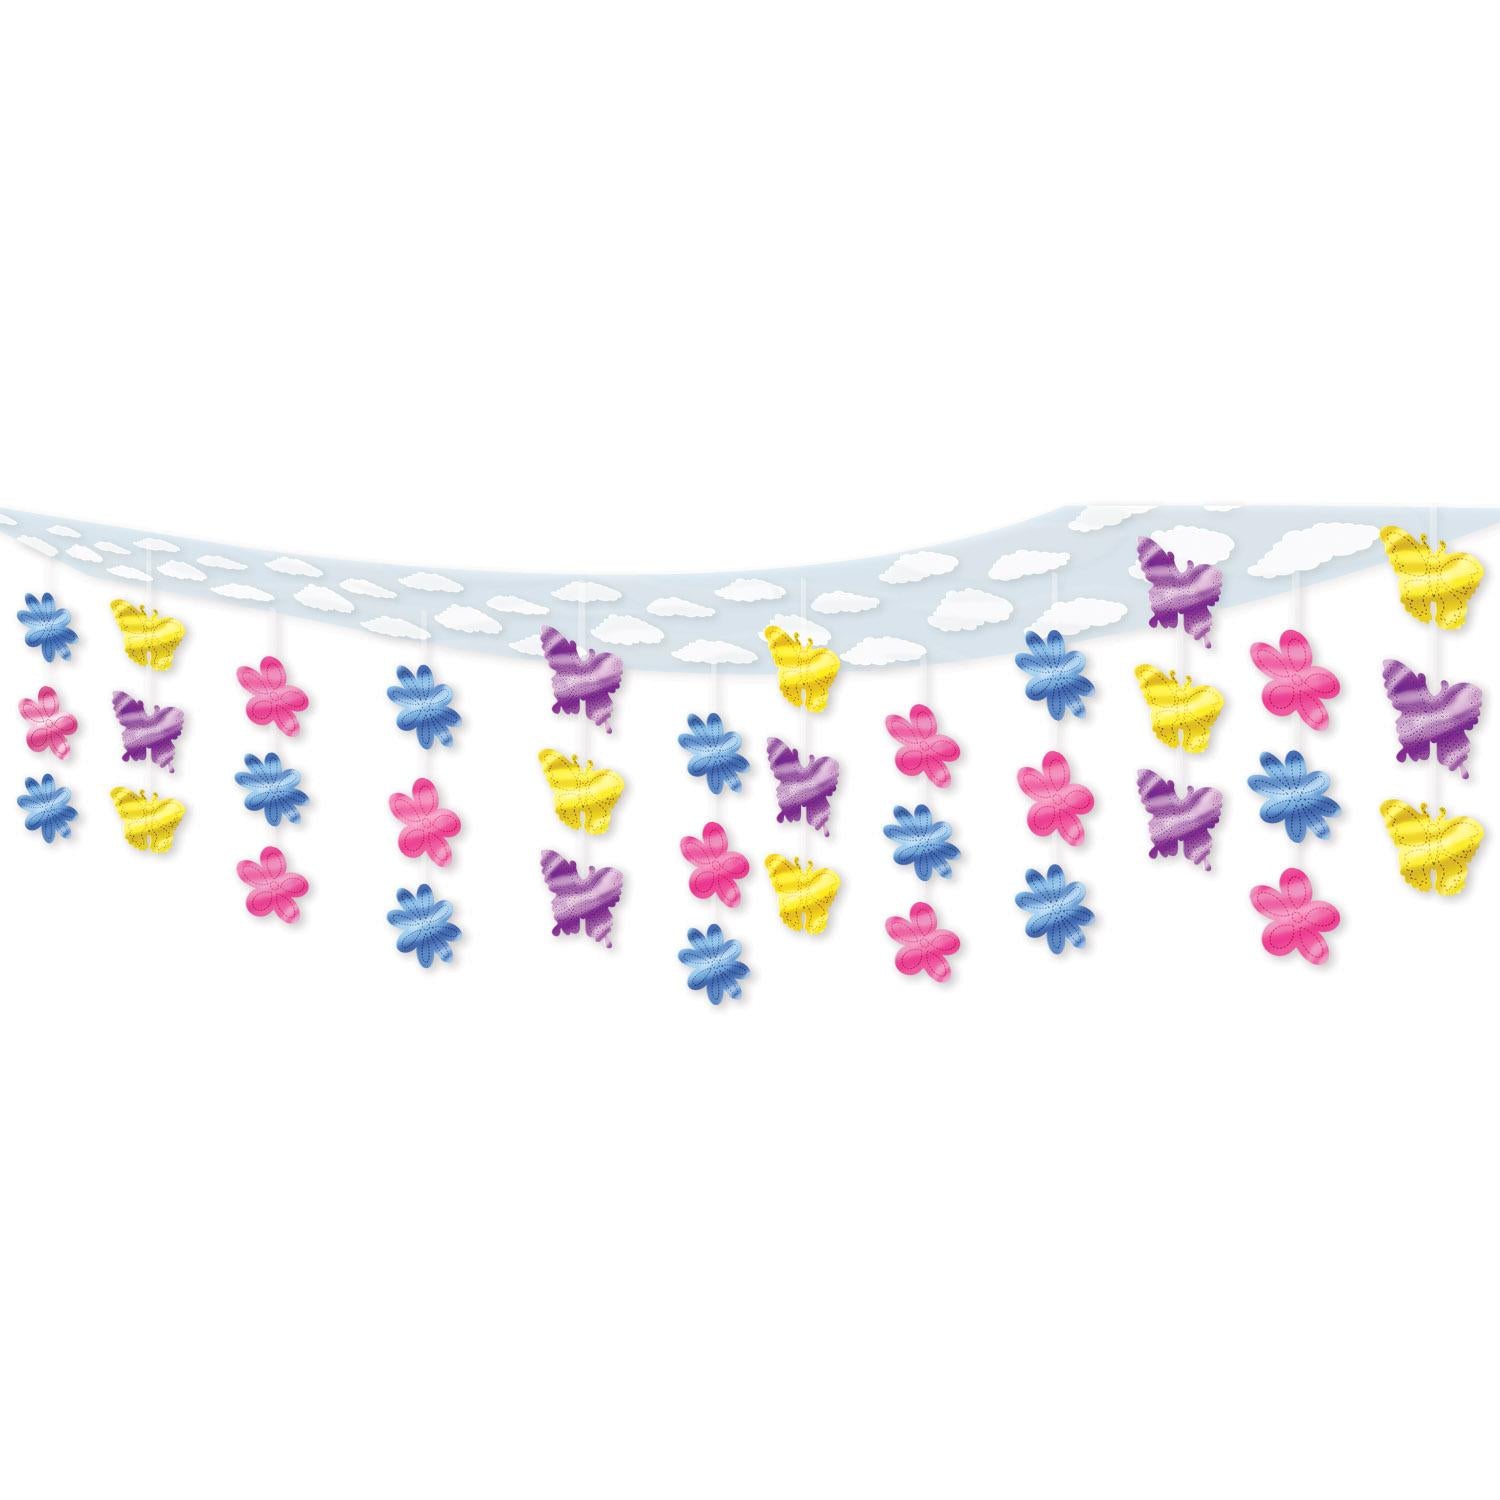 Butterfly & Flower Ceiling Party Decorations